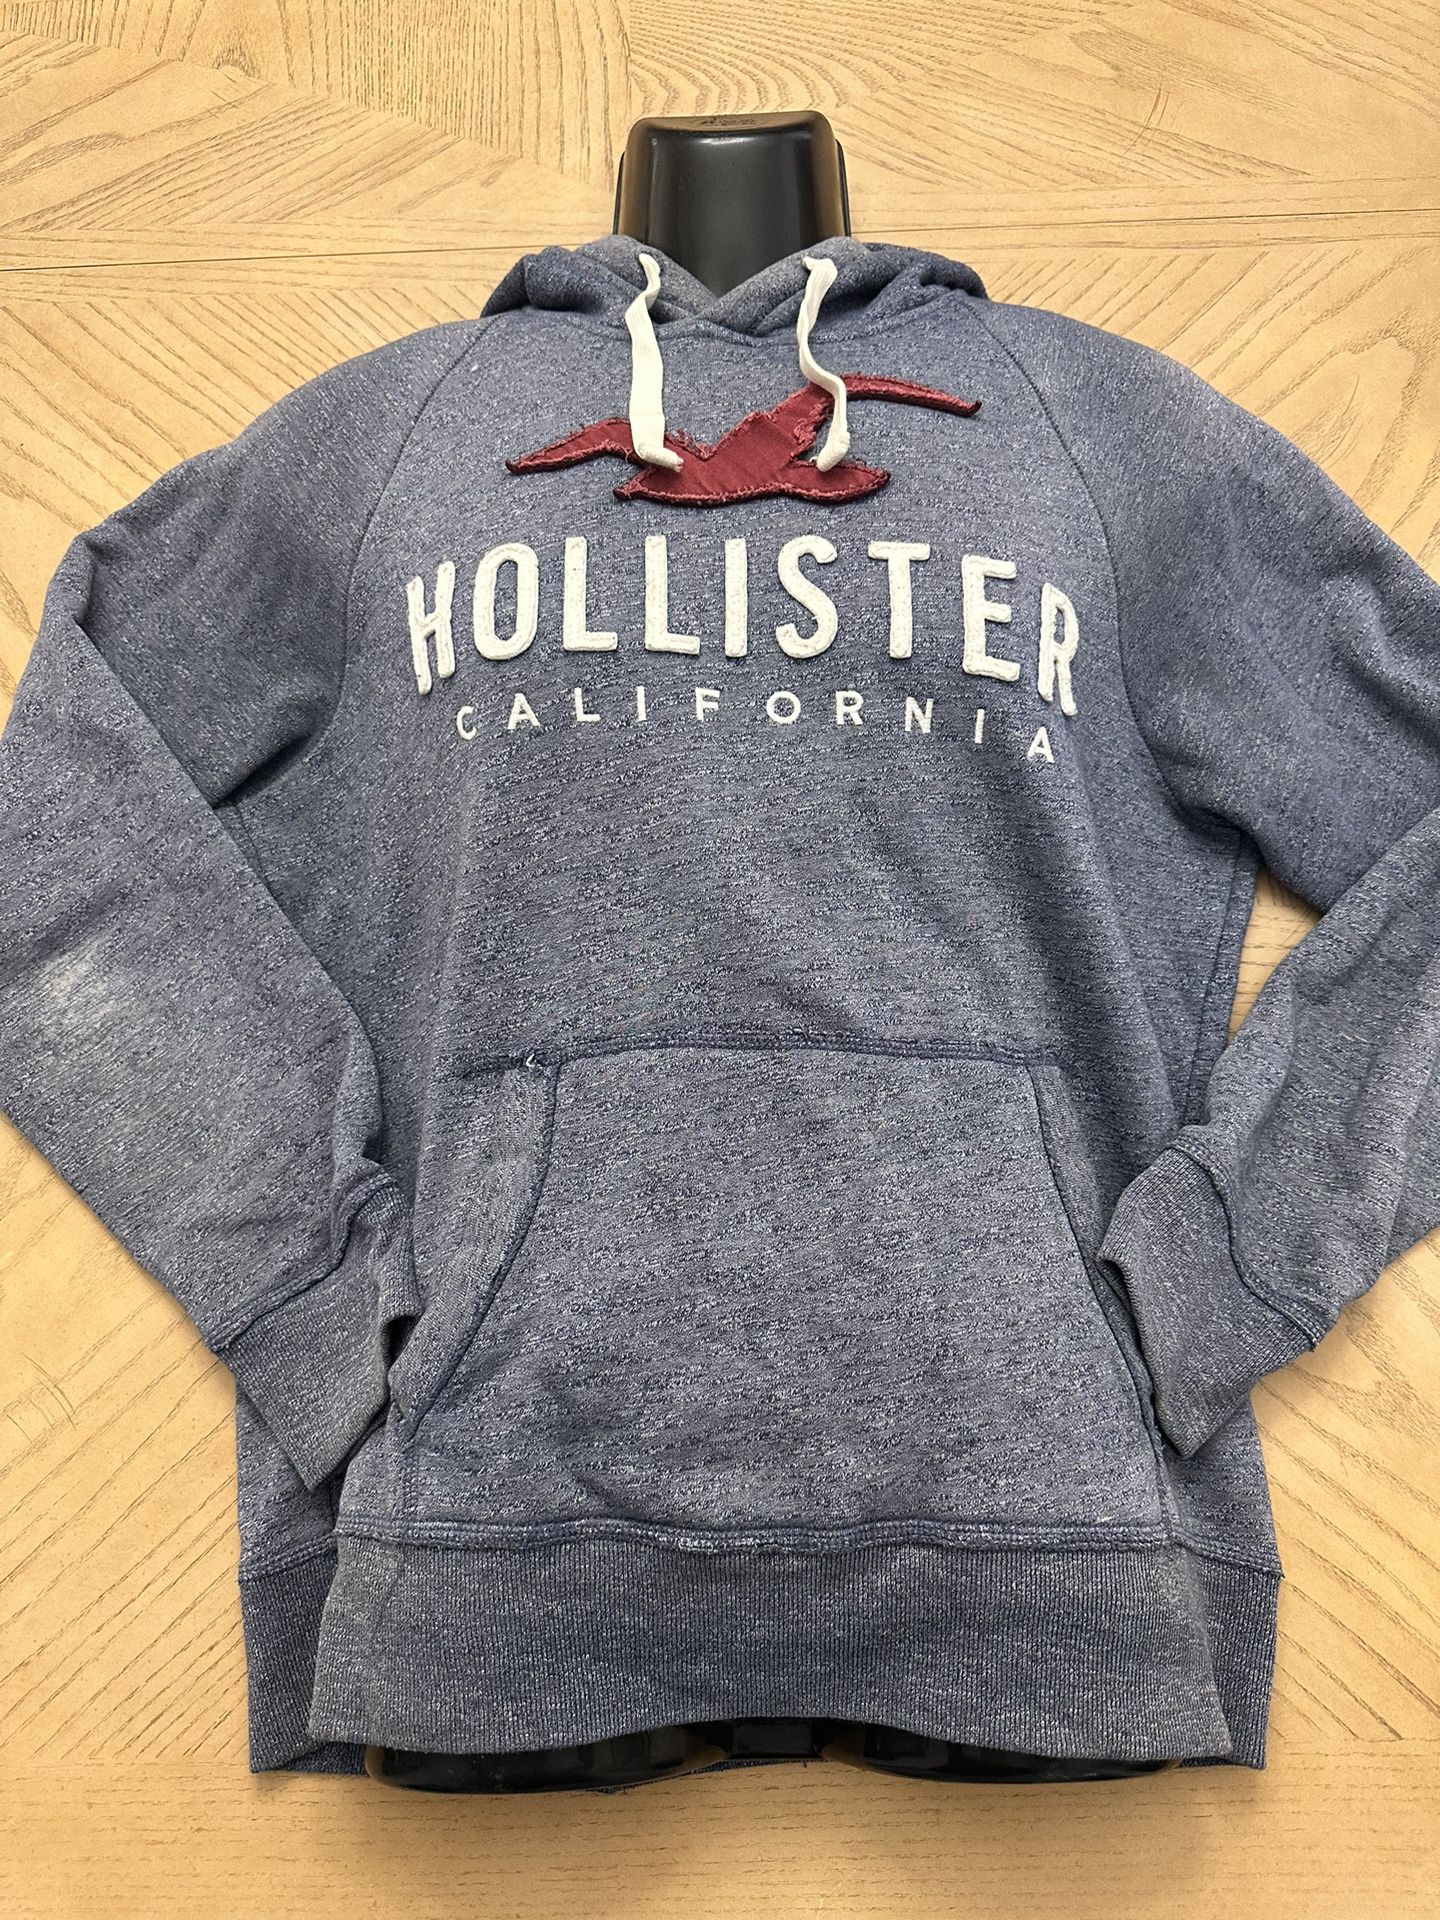 Hollister Pullover Hoodie Gray  Size small 